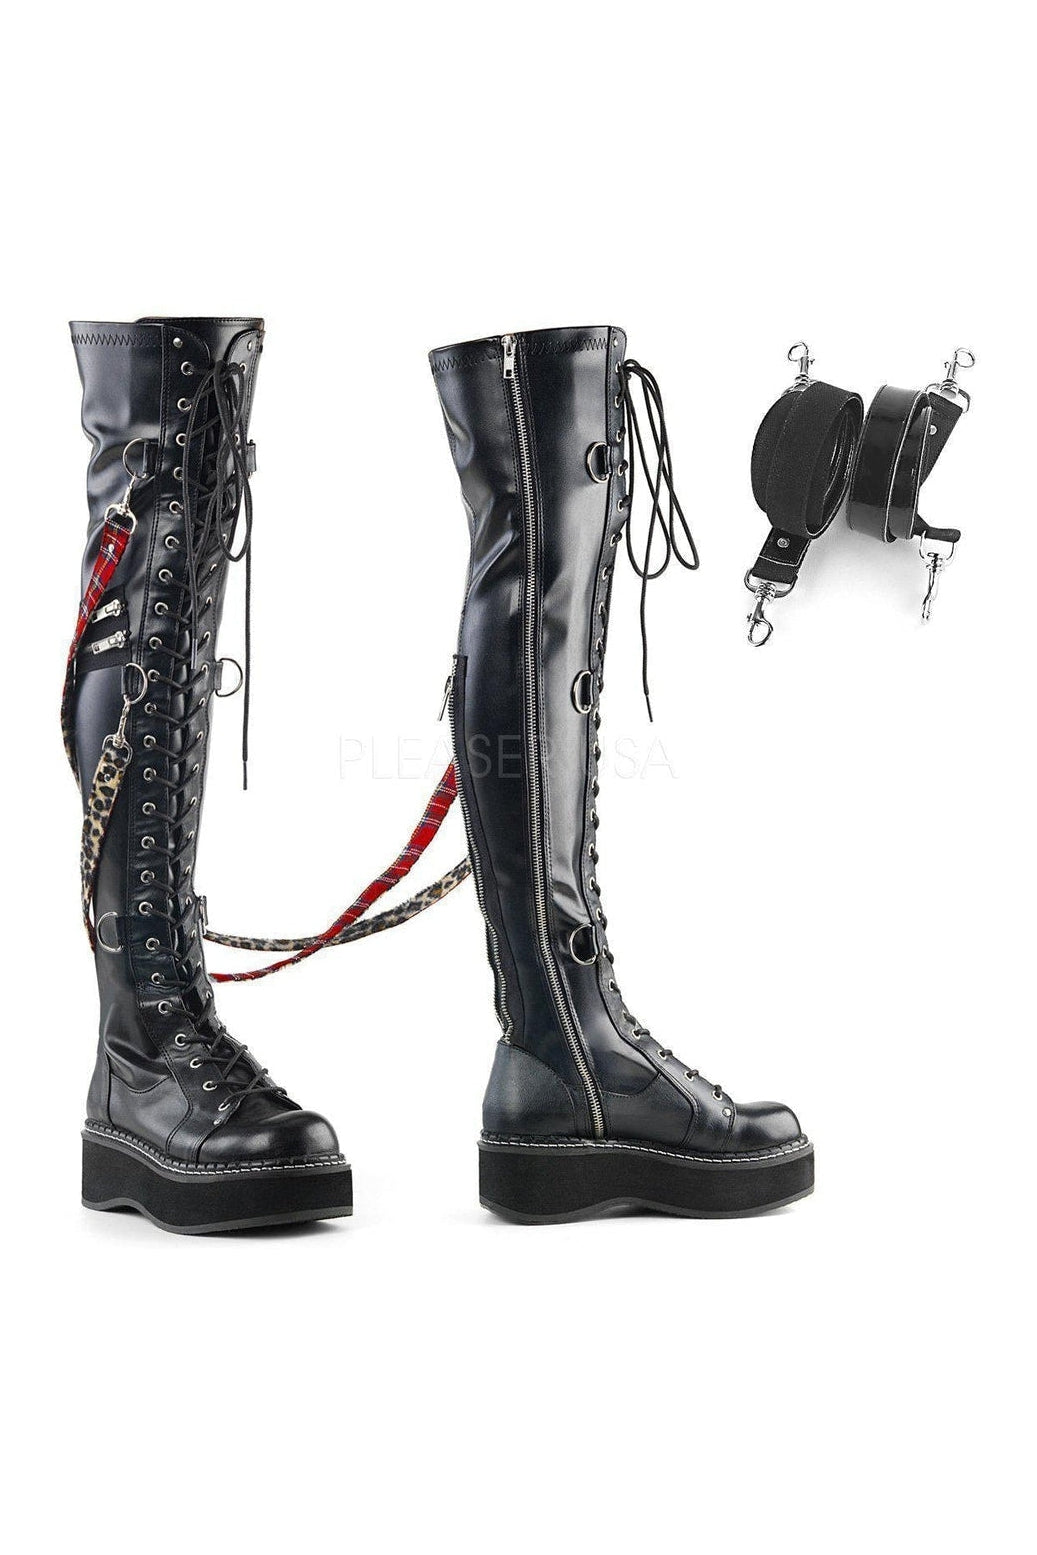 EMILY-377 Demonia Thigh Boot | Black Faux Leather-Demonia-SEXYSHOES.COM